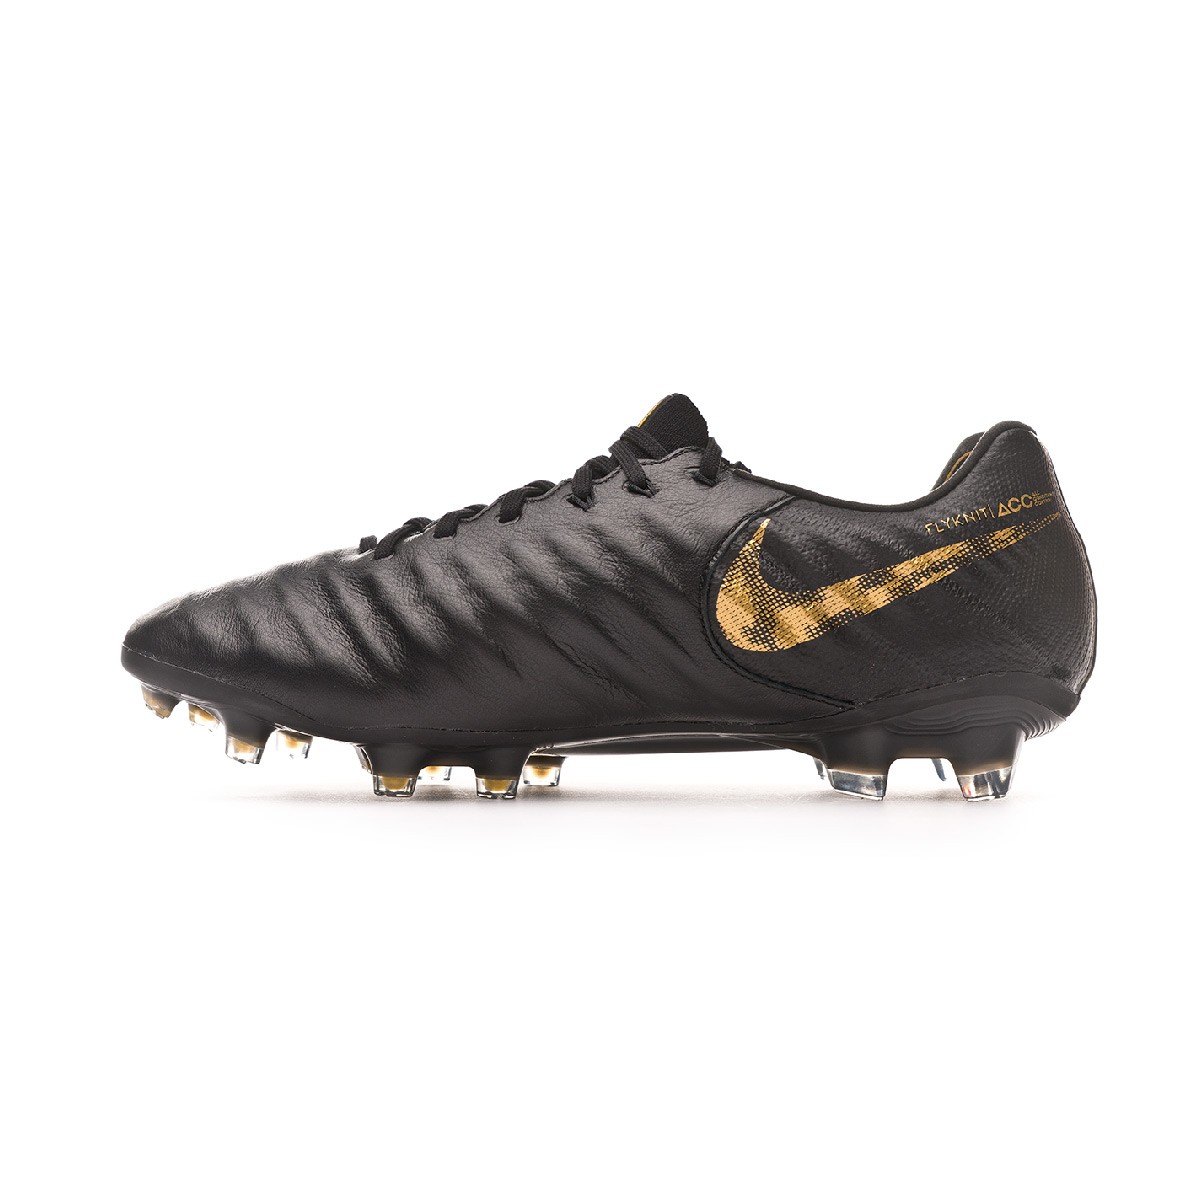 football boots black and gold